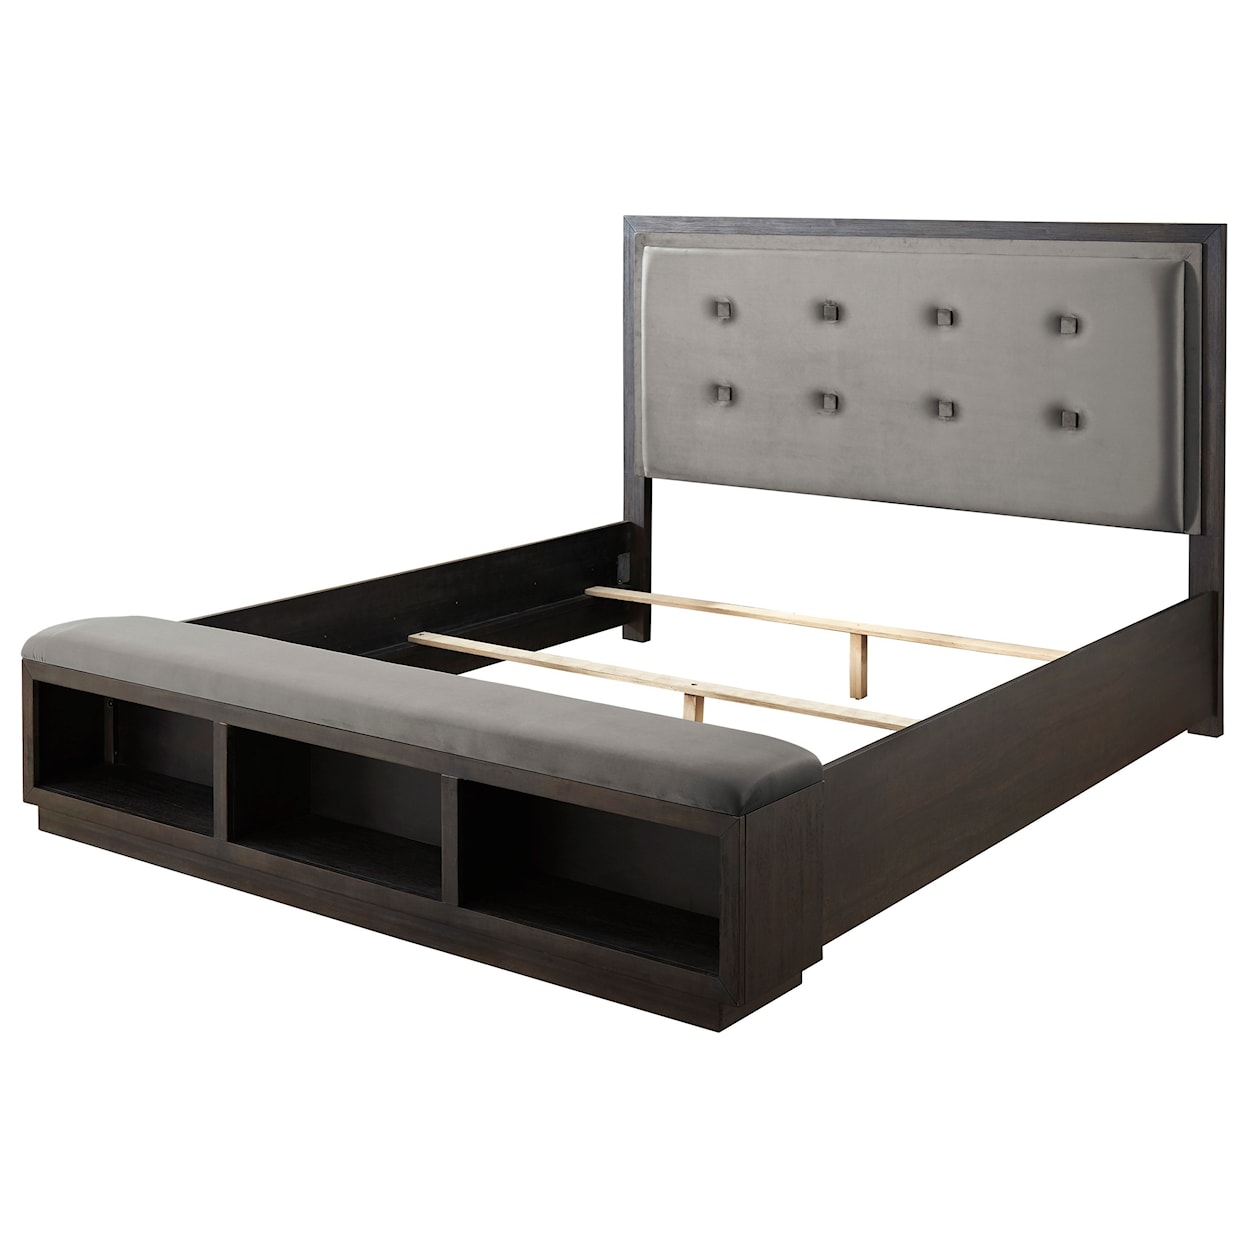 Signature Design by Ashley Hyndell King Upholstered Storage Bed